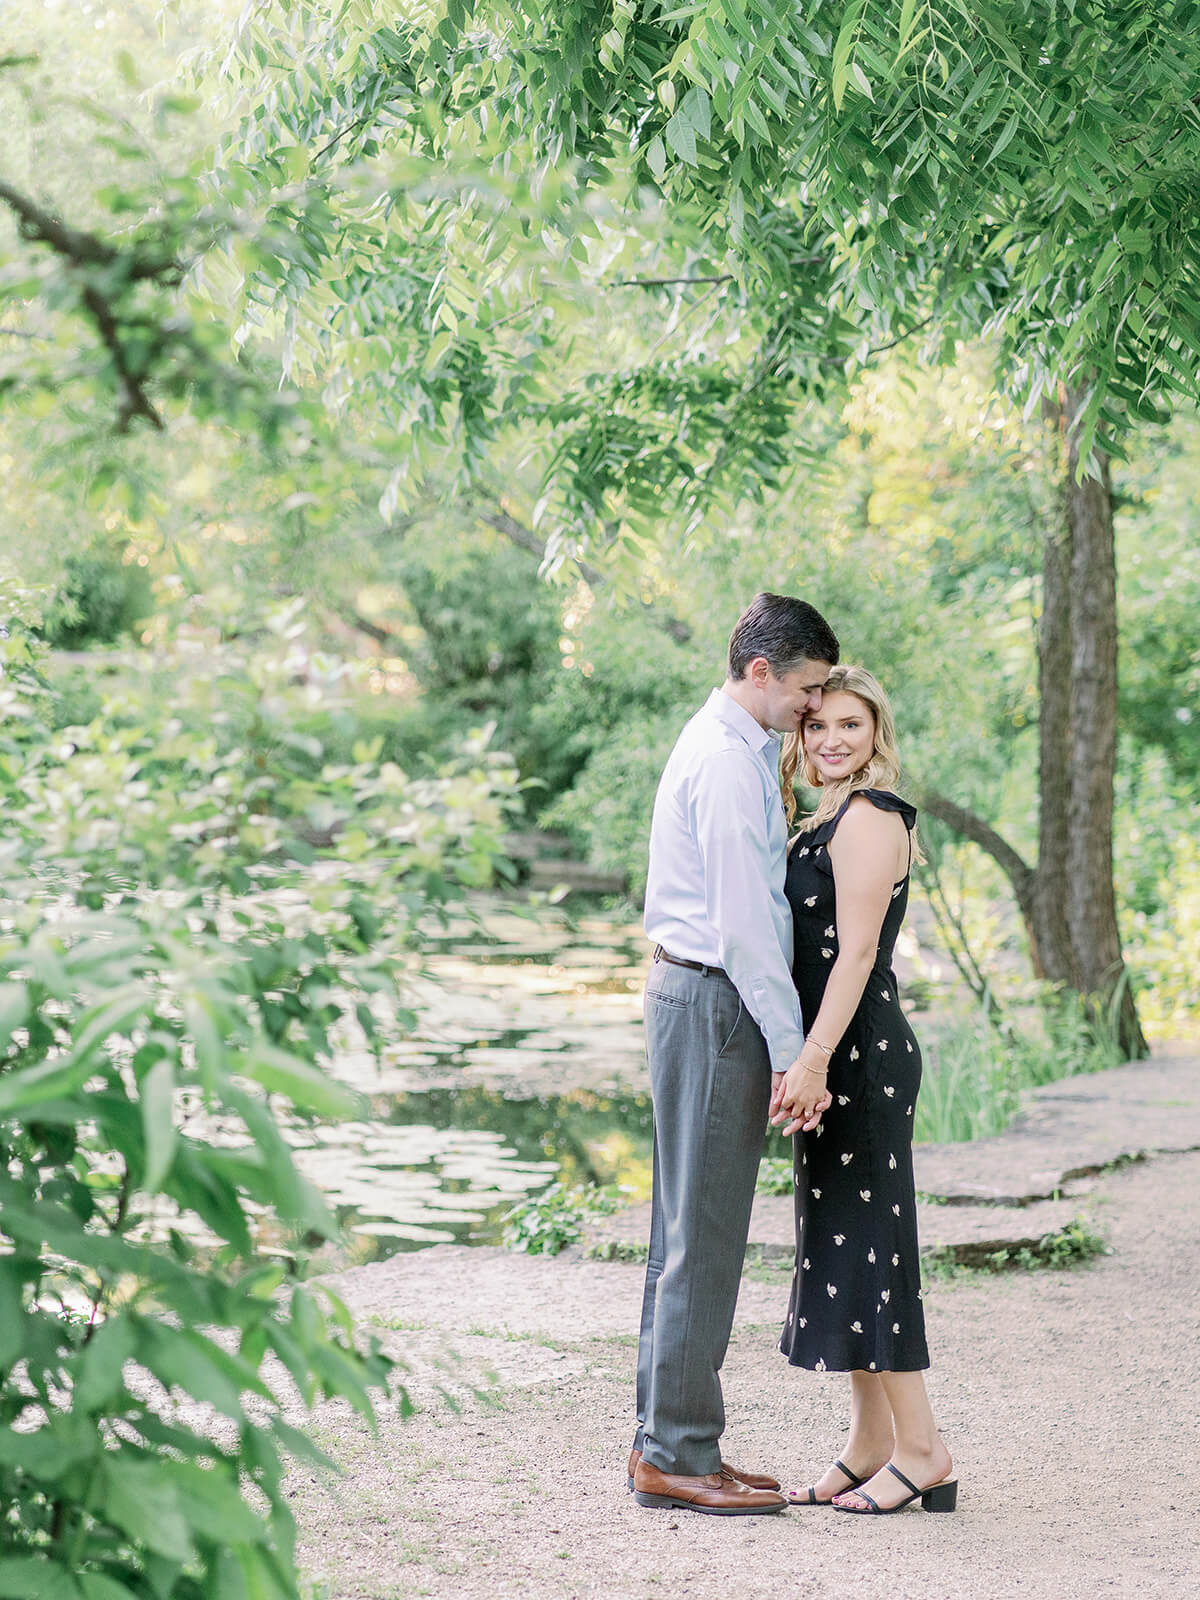 Alfred Caldwell Lily Pool | Chicago Wedding Photo Spot